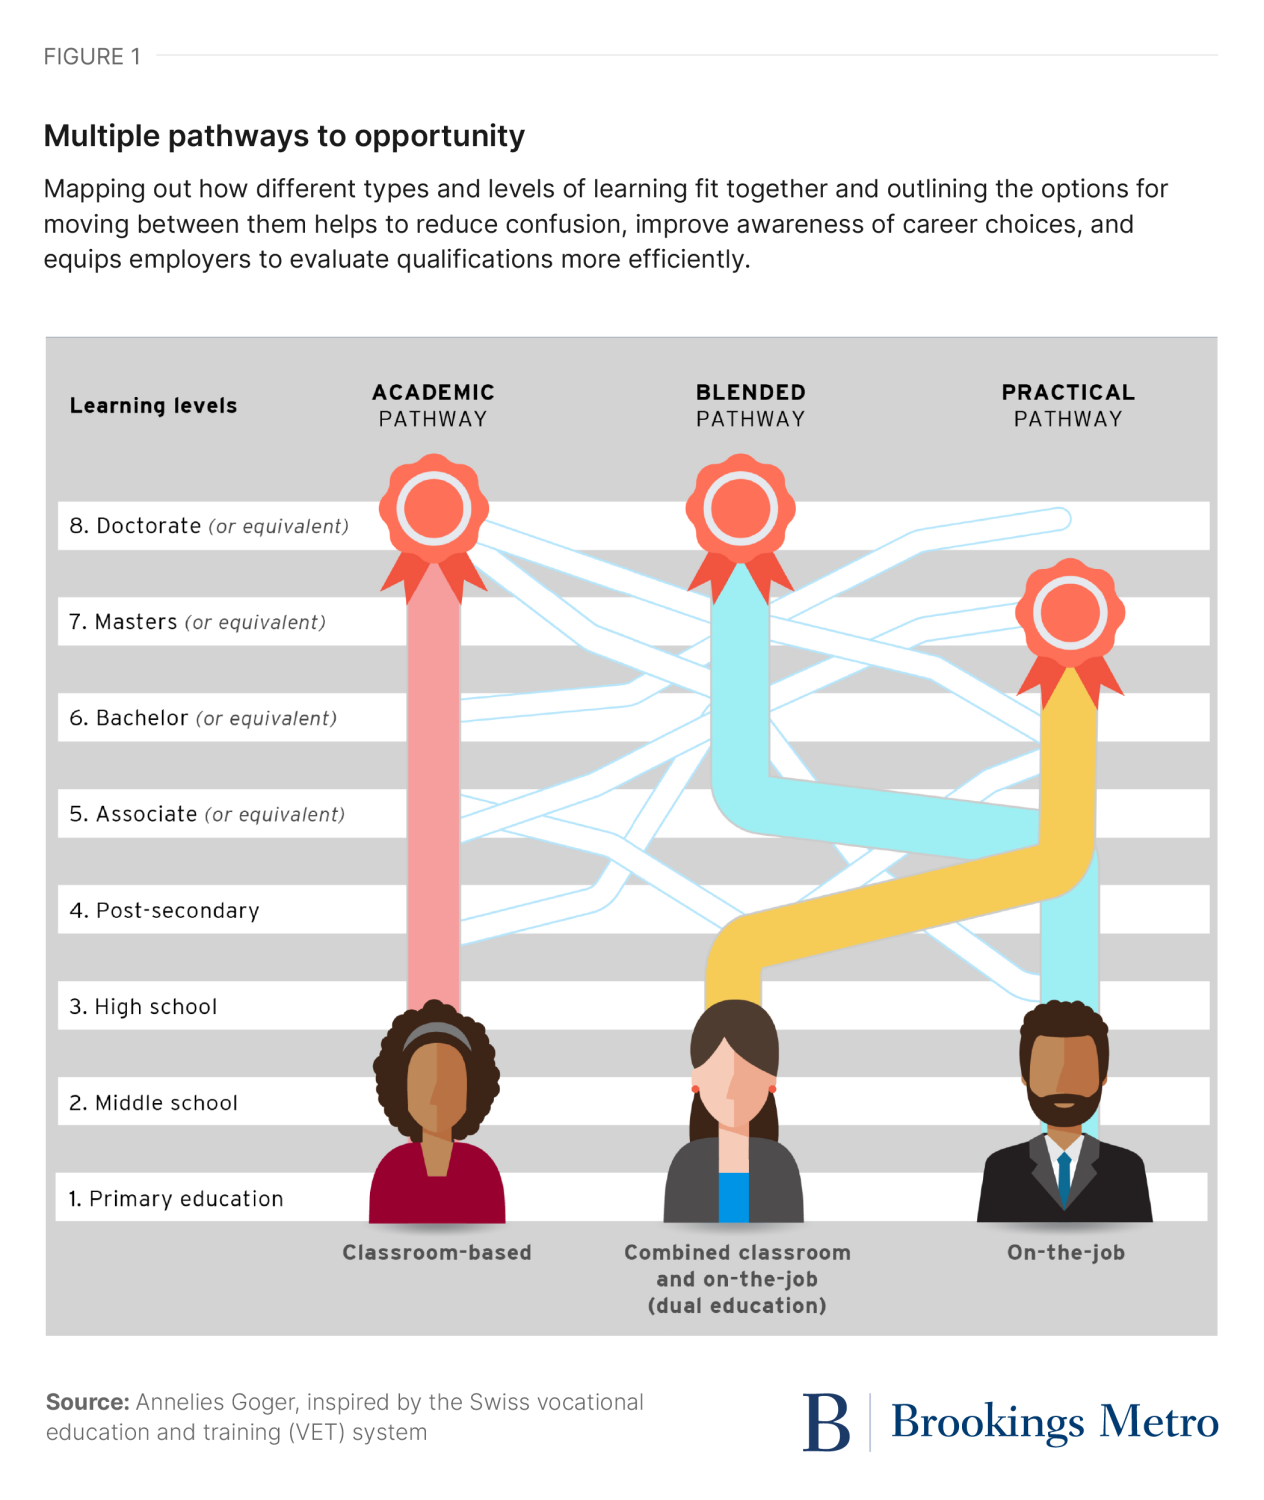 Figure 1. Multiple pathways to opportunity. Mapping out how different types and levels of learning fit together and outlining the options for moving between them helps to reduce confusion, improve awareness of career choices, and equips employers to evaluate qualifications more efficiently.